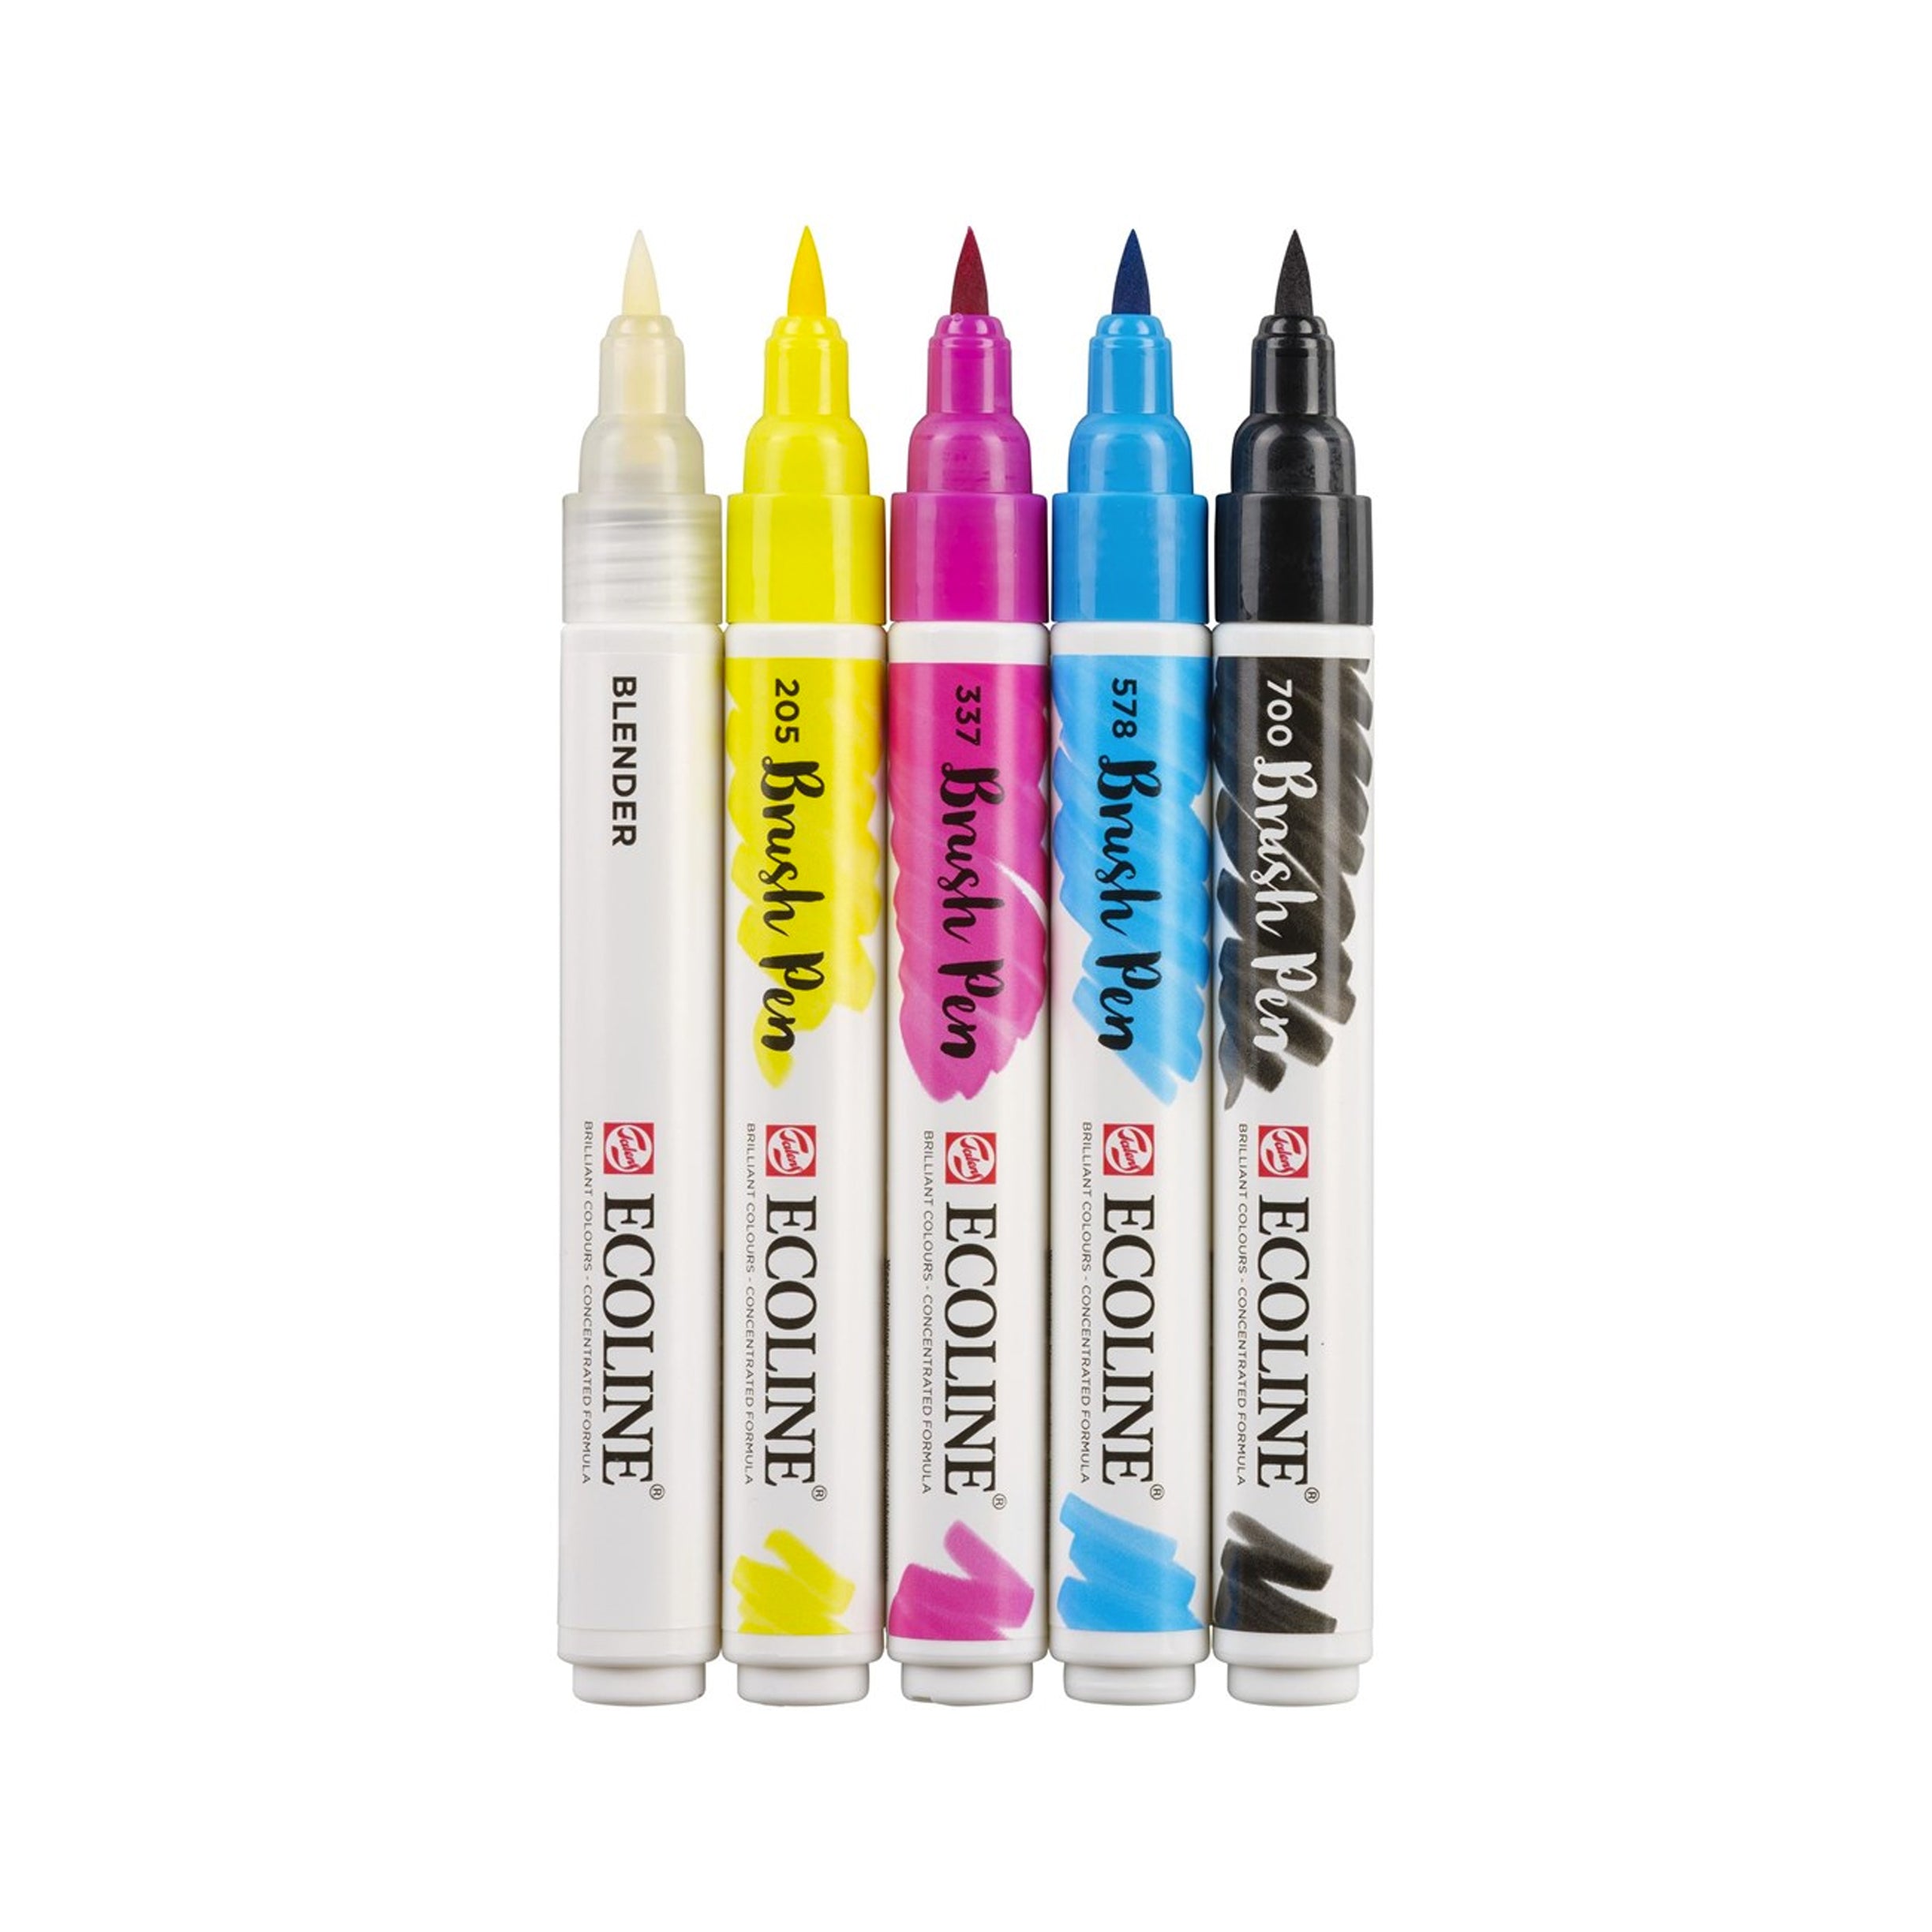 Talens Ecoline Brush Markers